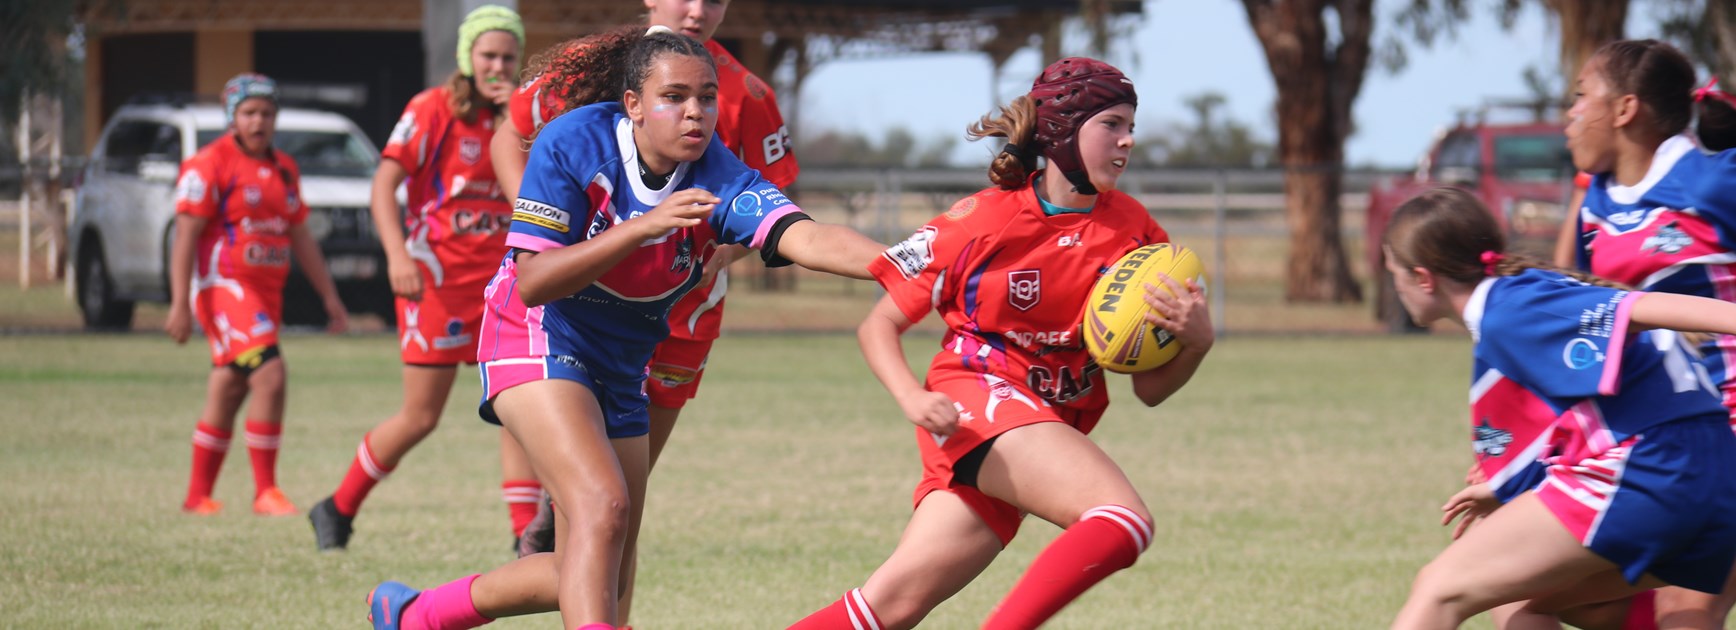 Outback spirit shines at Arthur Beetson Foundation Junior Muster